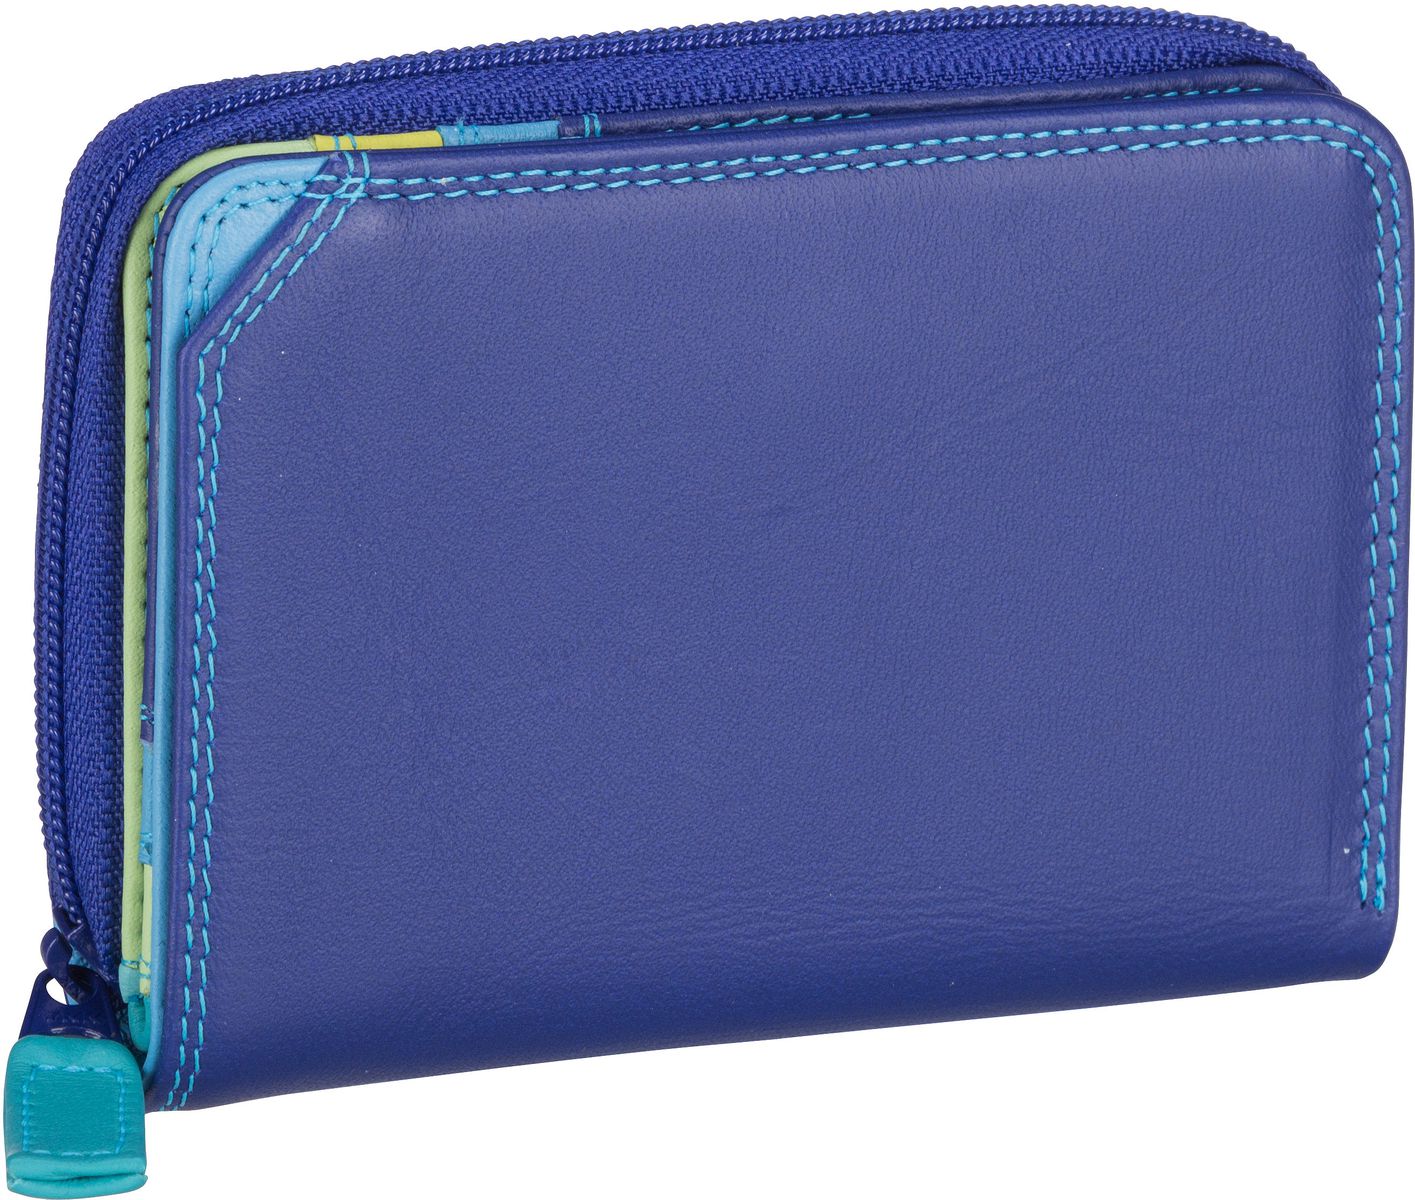 Mywalit Small Wallet w/Zip Around Purse - Seascape